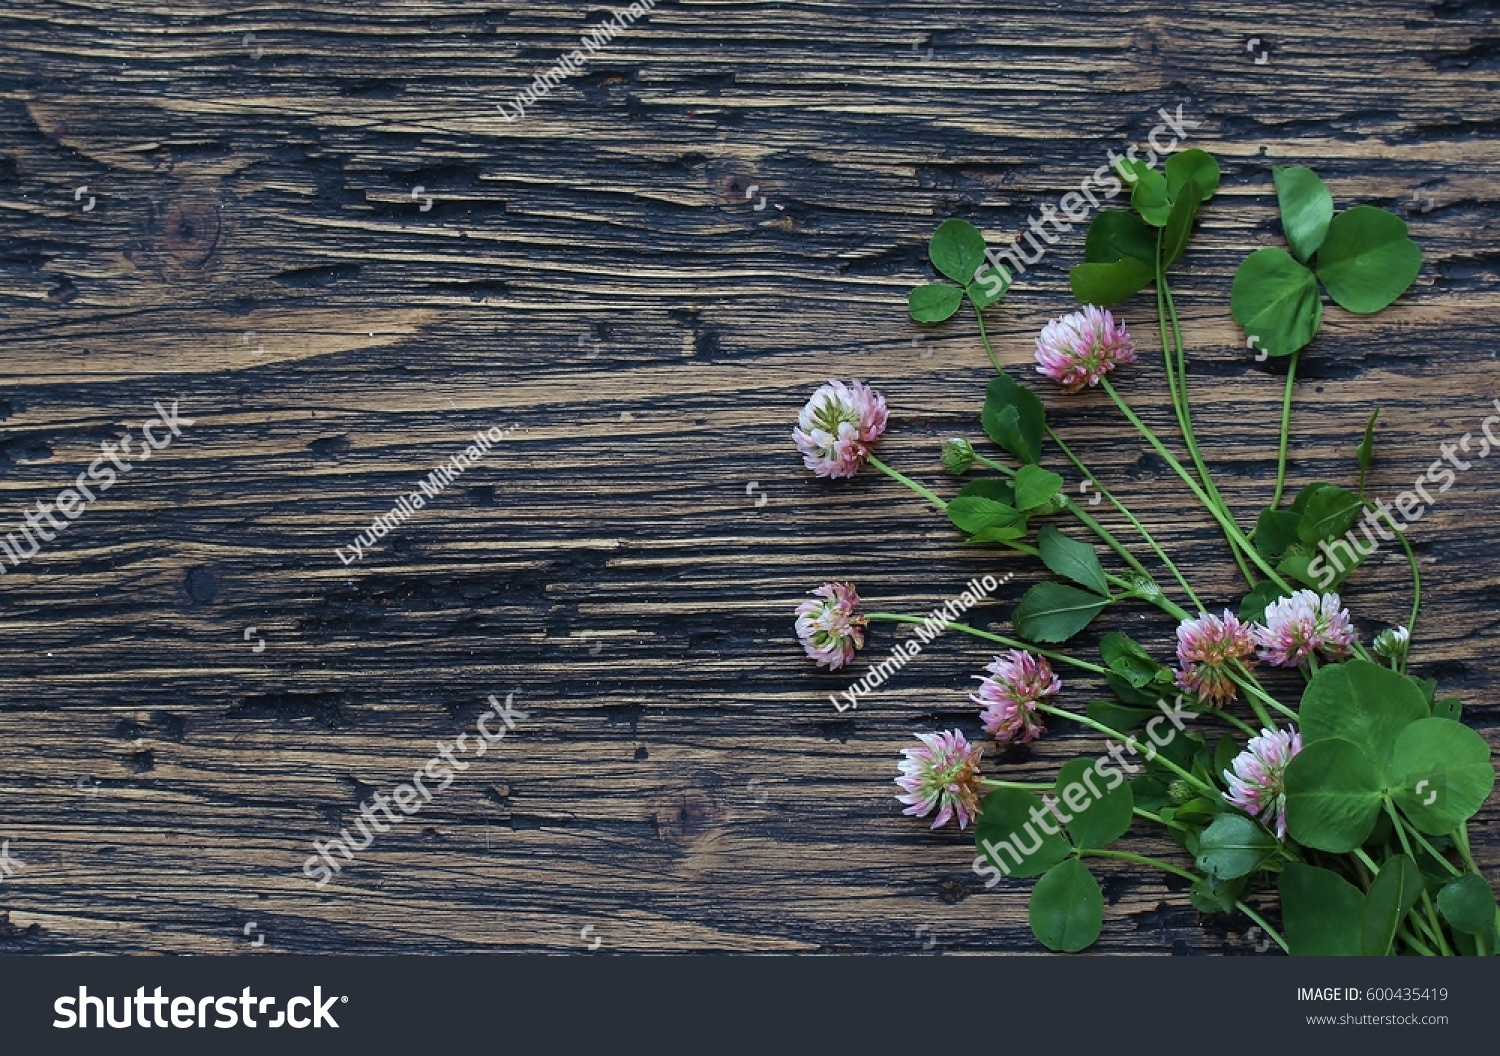 Clover leaves and flowers on the background of an old board. St.Patrick 's Day. #600435419